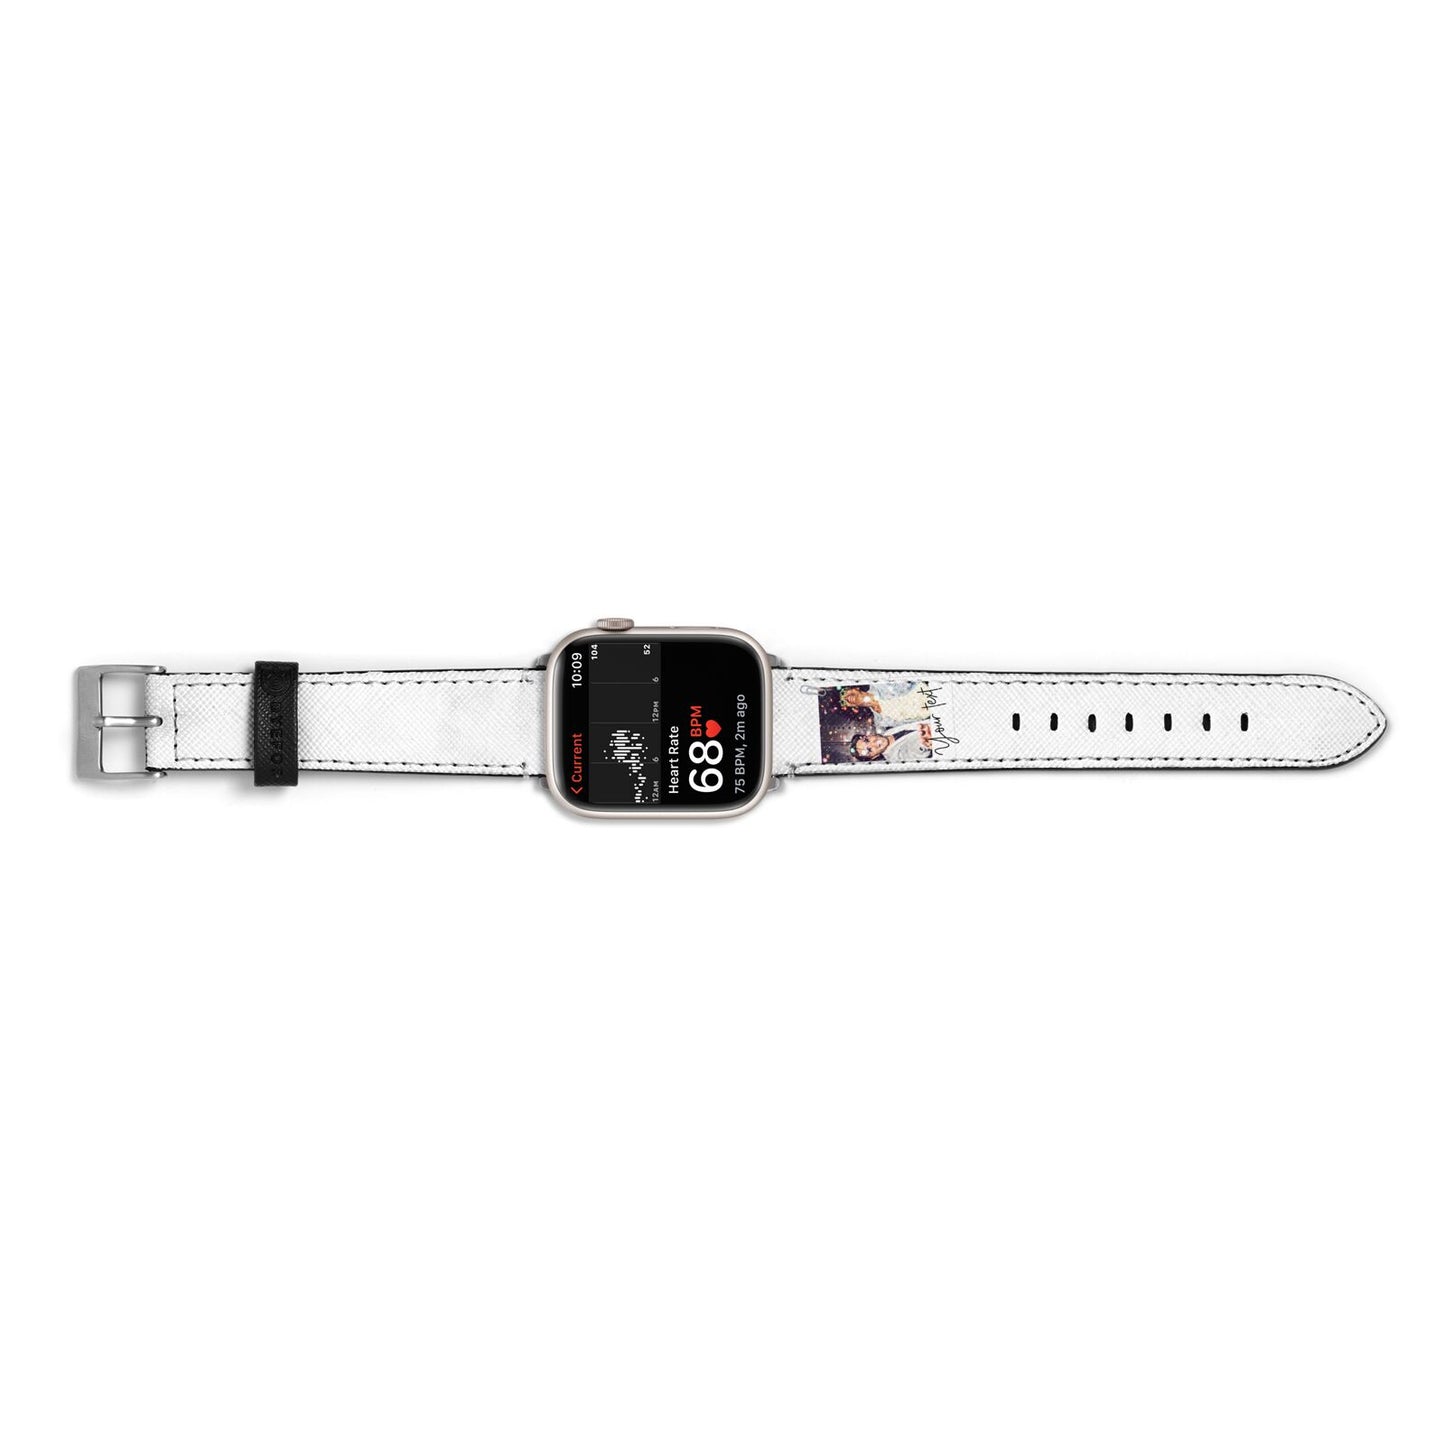 Personalised Photo with Text Apple Watch Strap Size 38mm Landscape Image Silver Hardware